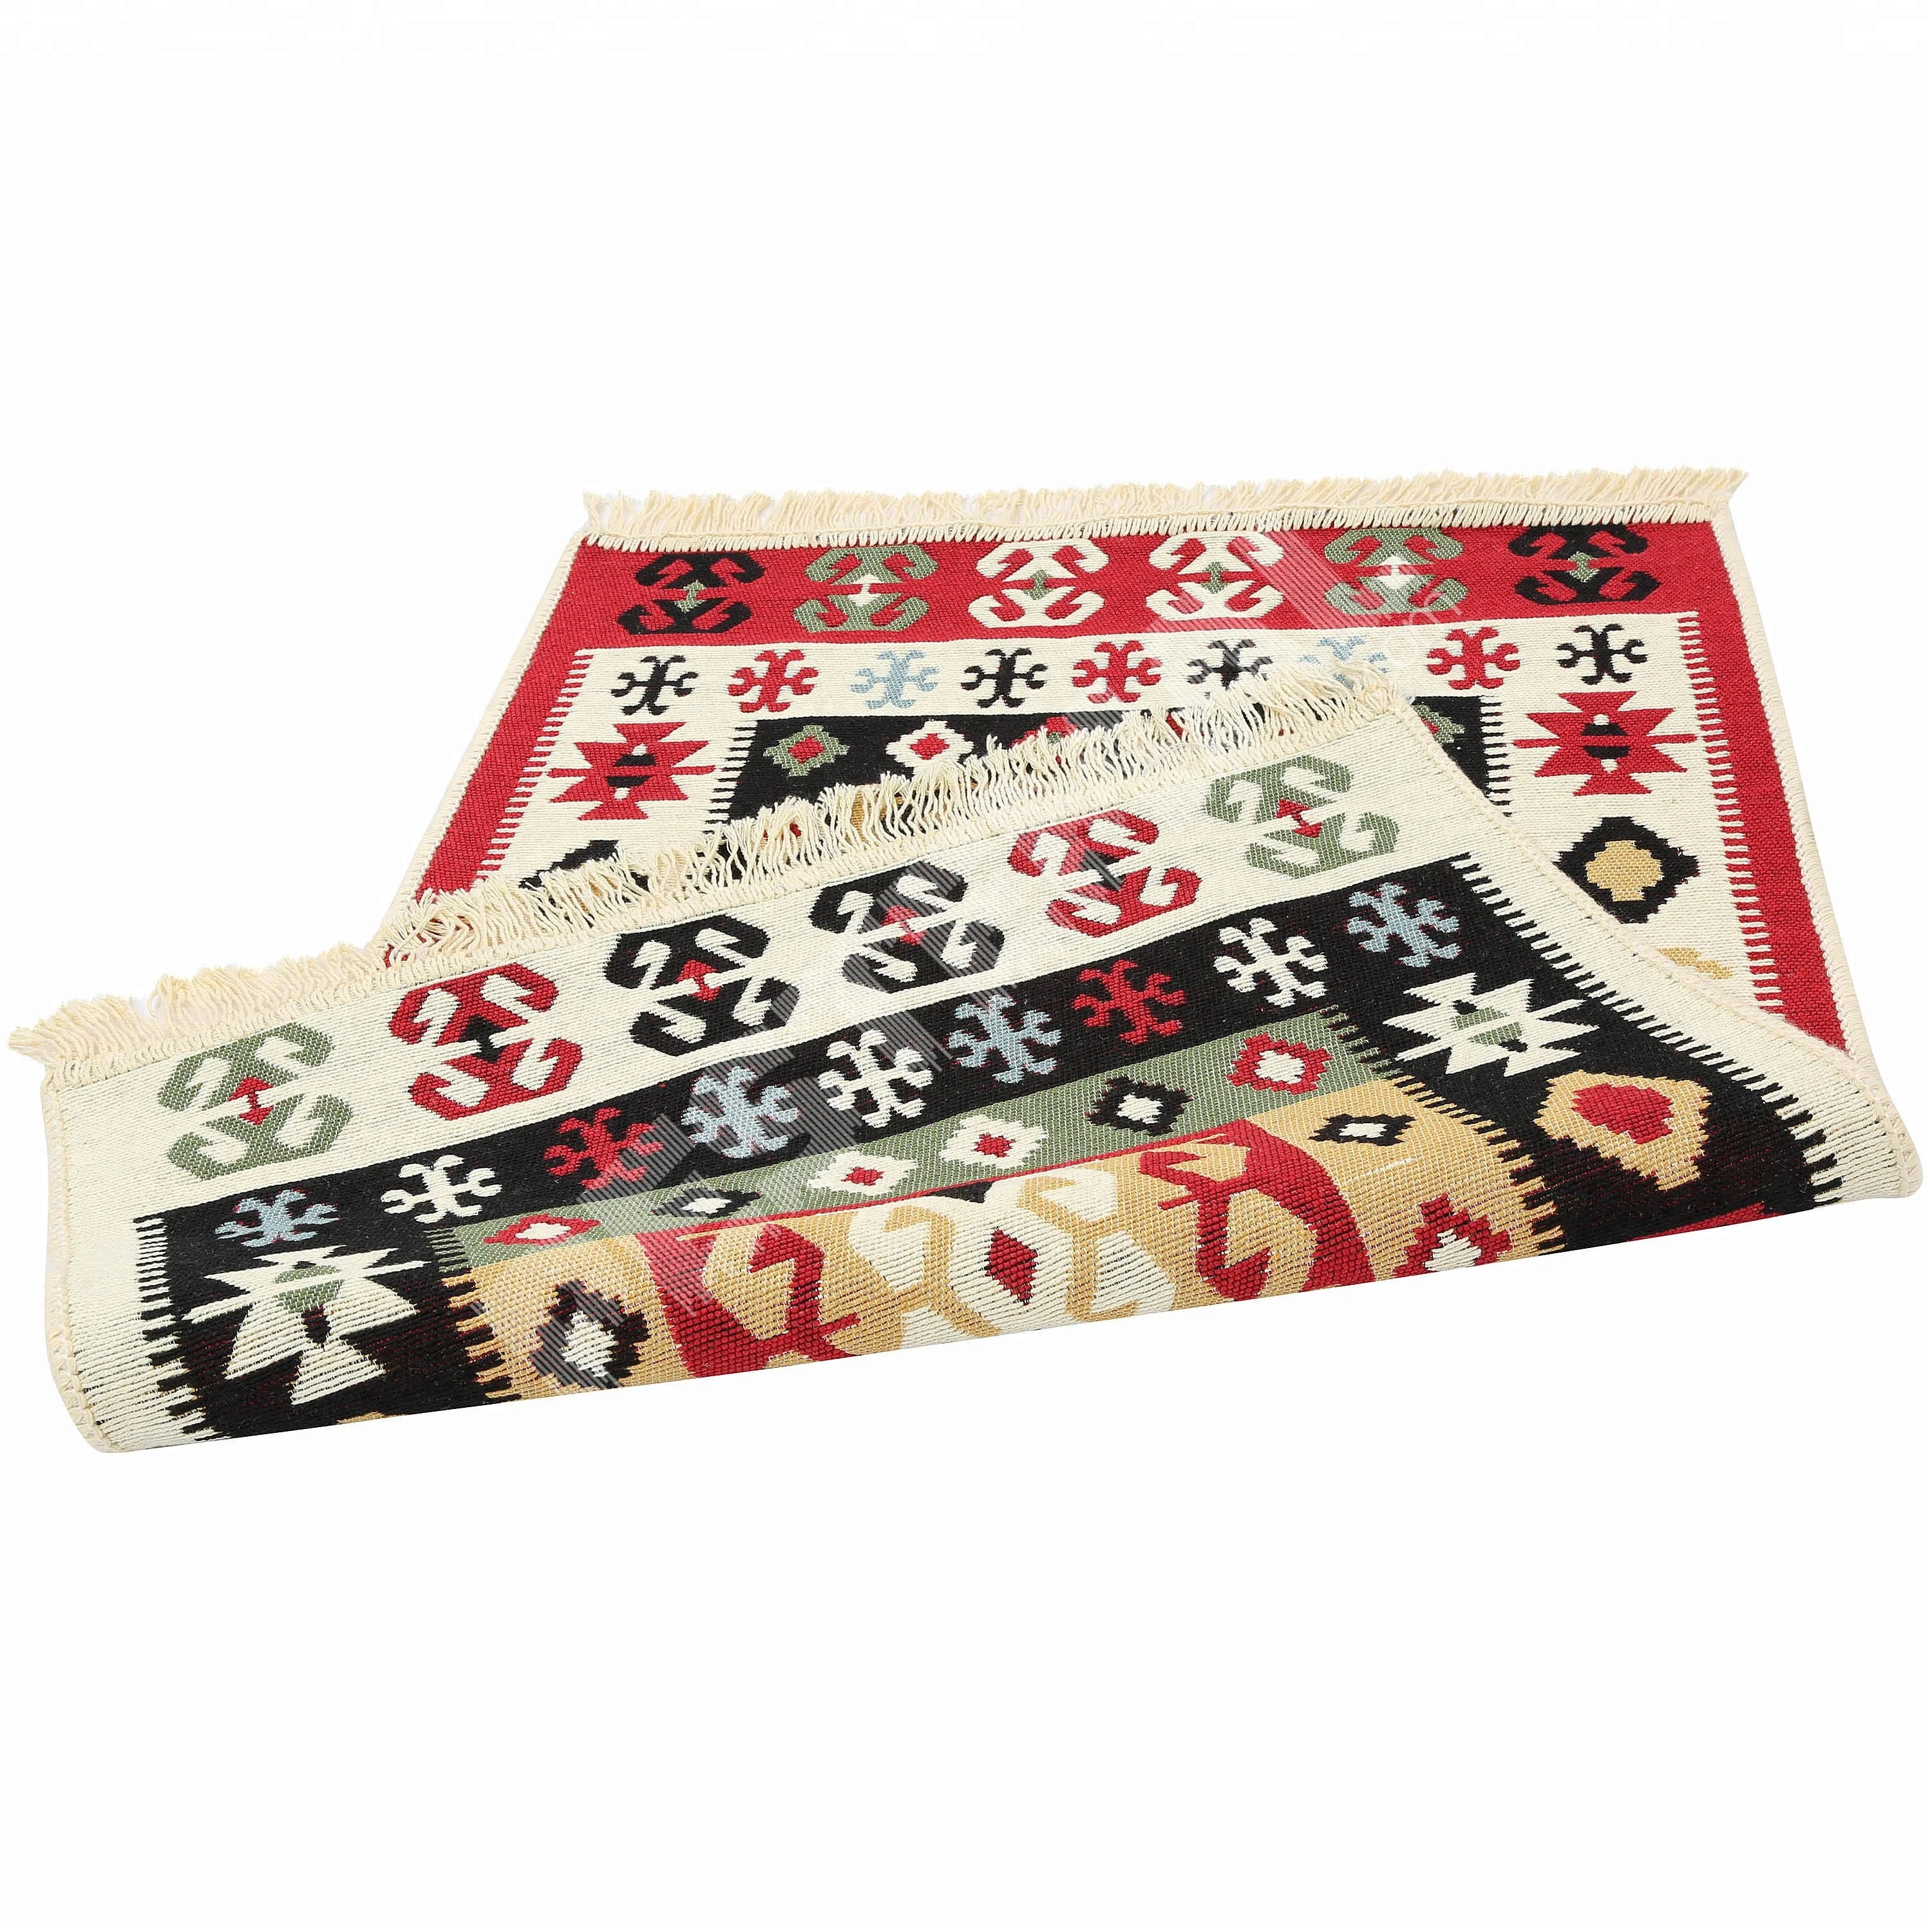 Turkish Hand Woven Special Design Private Label Anti-Slip Rugs and Carpets for Floors with Microfiber Thick Cloth %100 Cotton